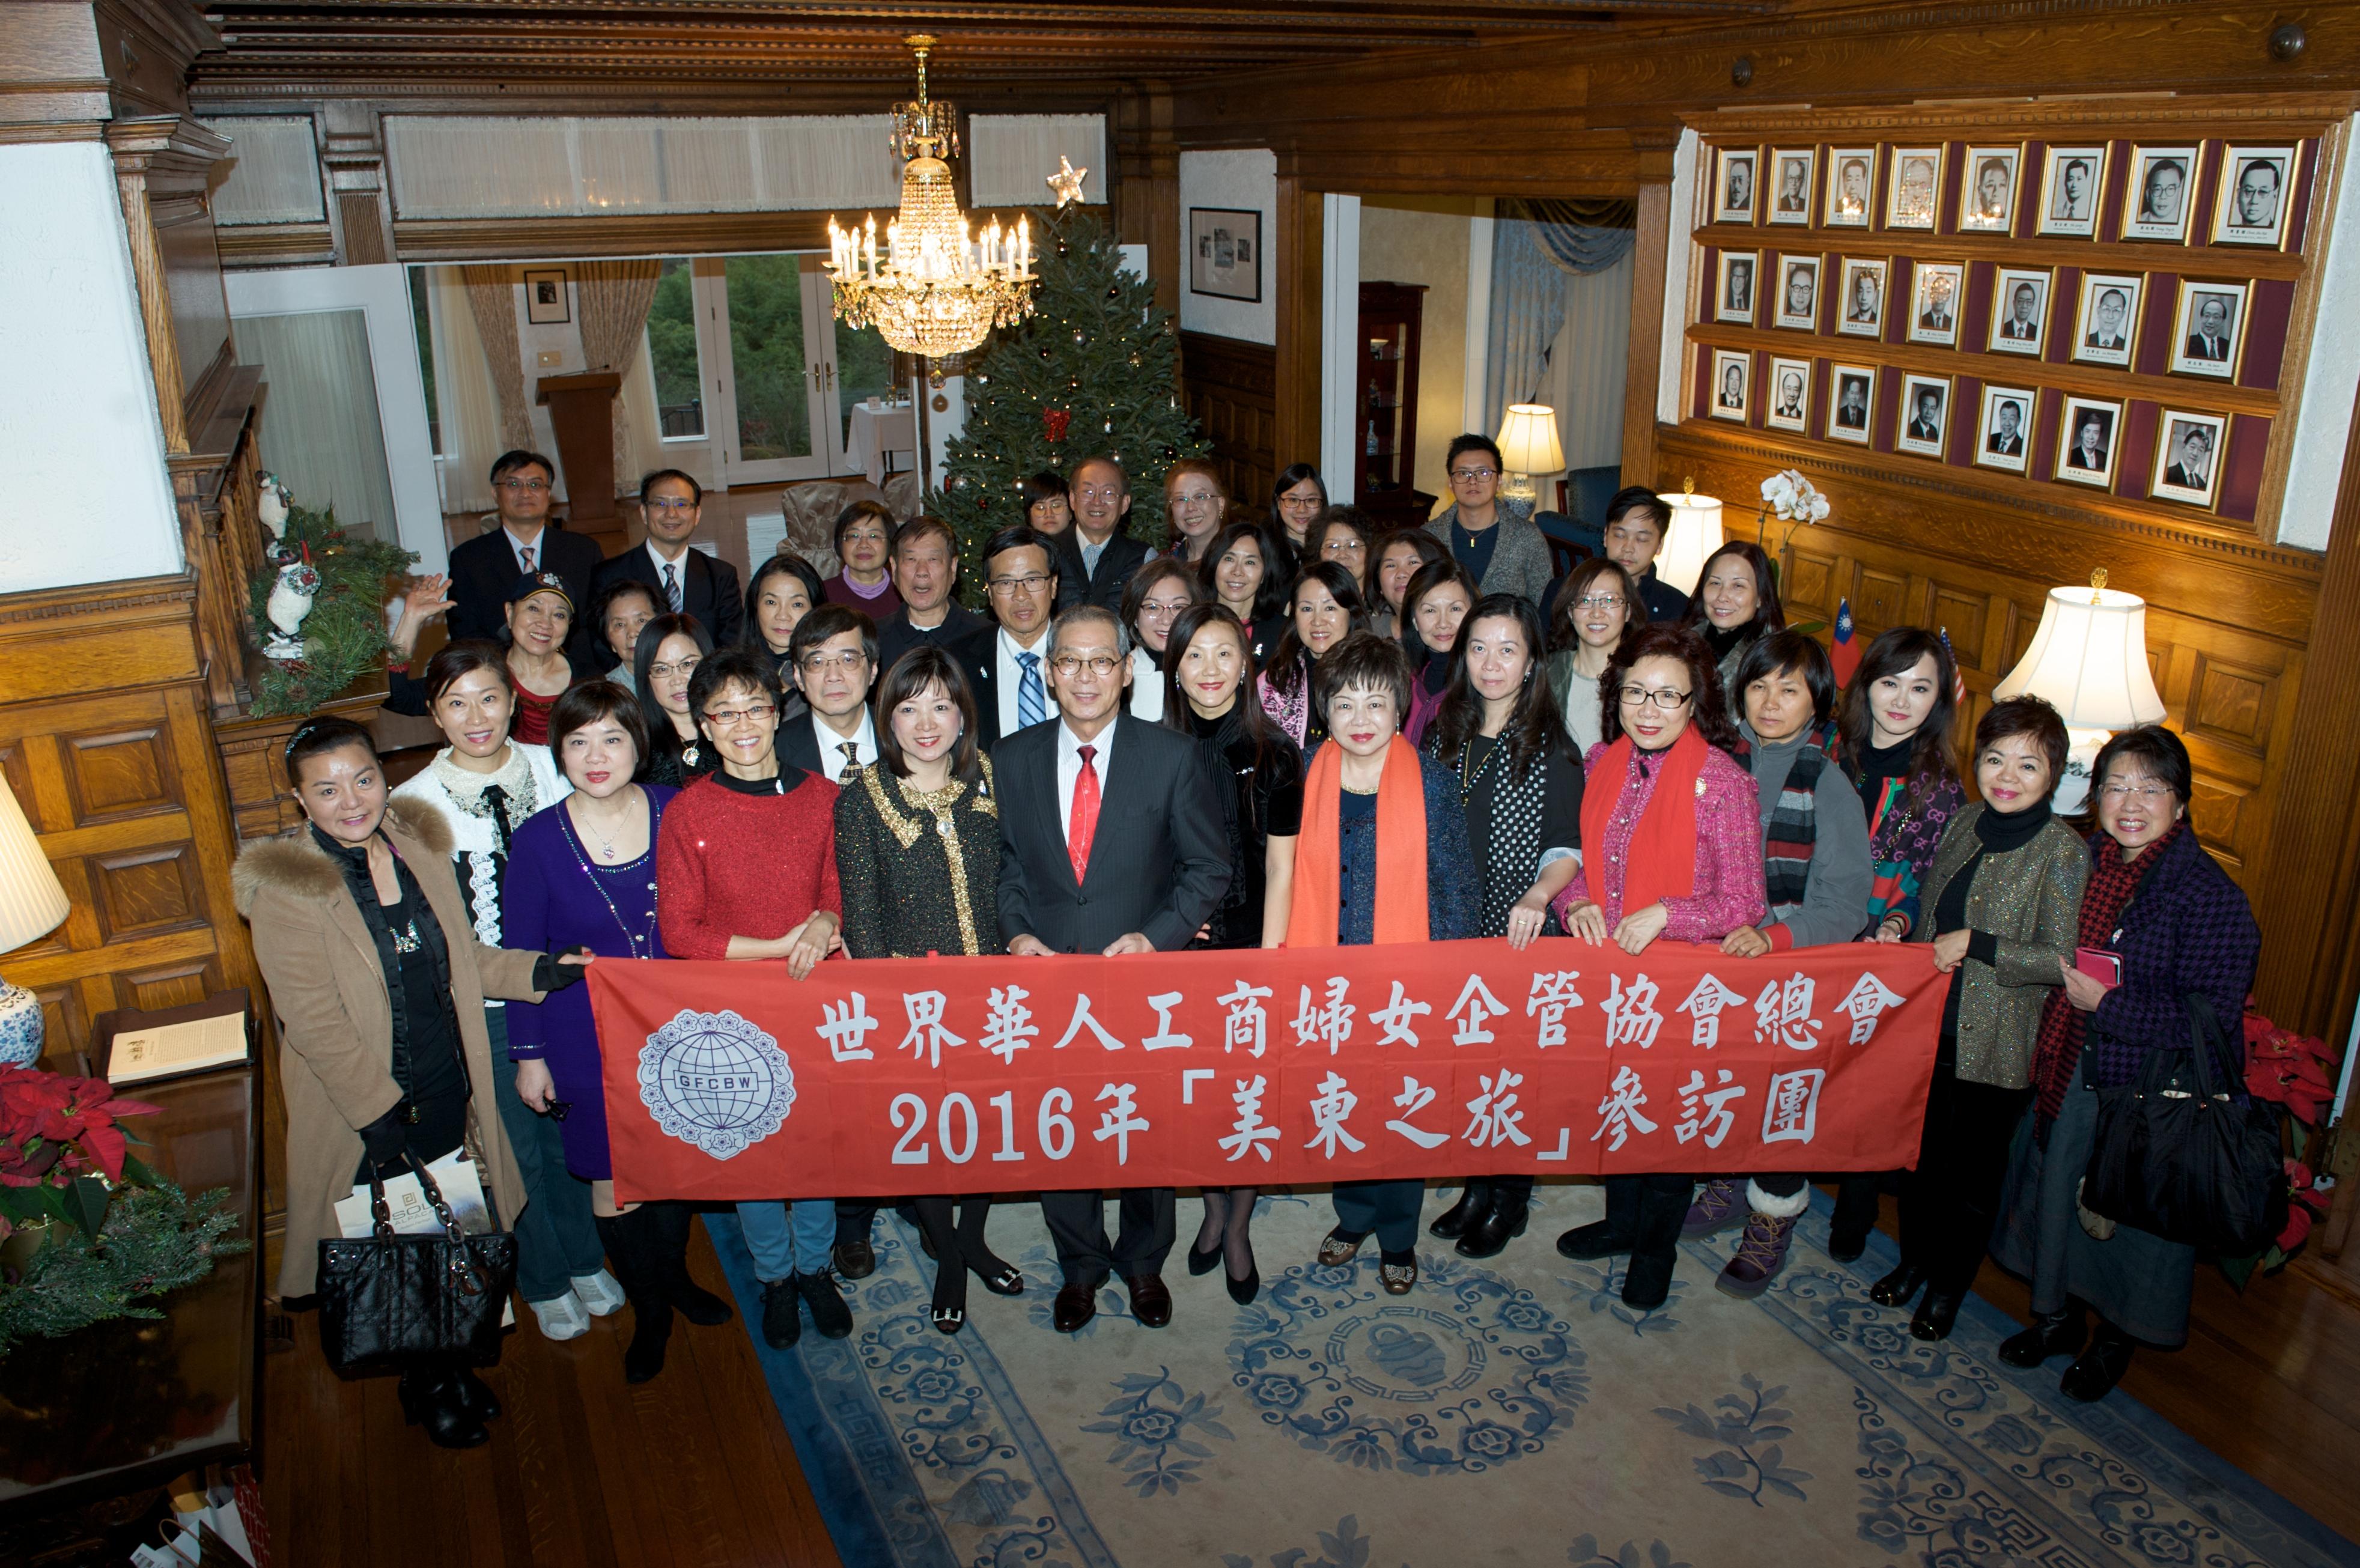 On December 18, 2016, Representative Stanley Kao and Mrs. Kao hosted a 30-member delegation of the Global Federation of Chinese Business Women at the Twin Oaks Estate during the delegation's tour of the Mid-Atlantic region. 